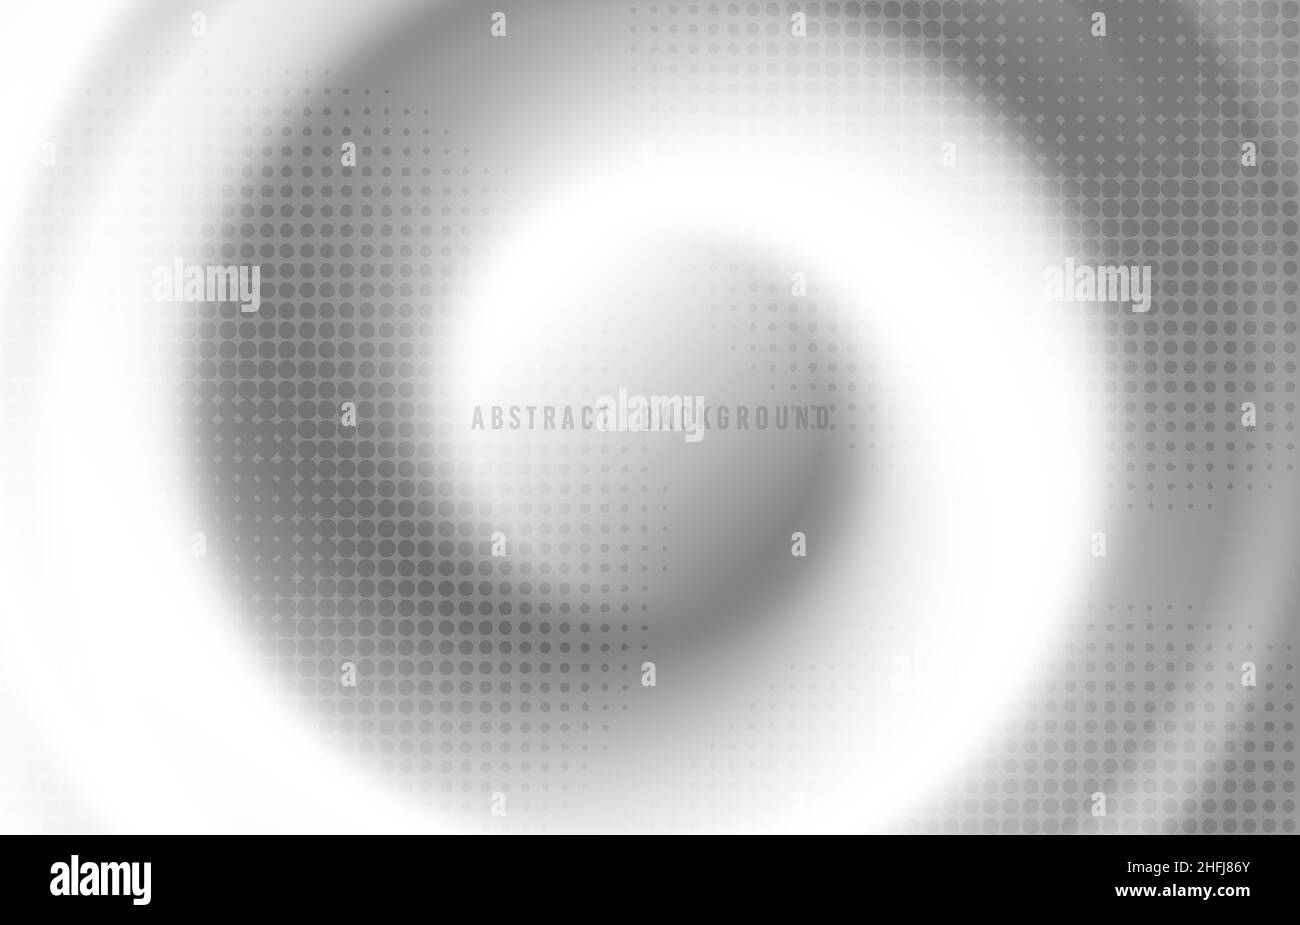 Abstract white circle pattern design artwork decorative template. Overlapping with halftone style circles background. Stock Vector